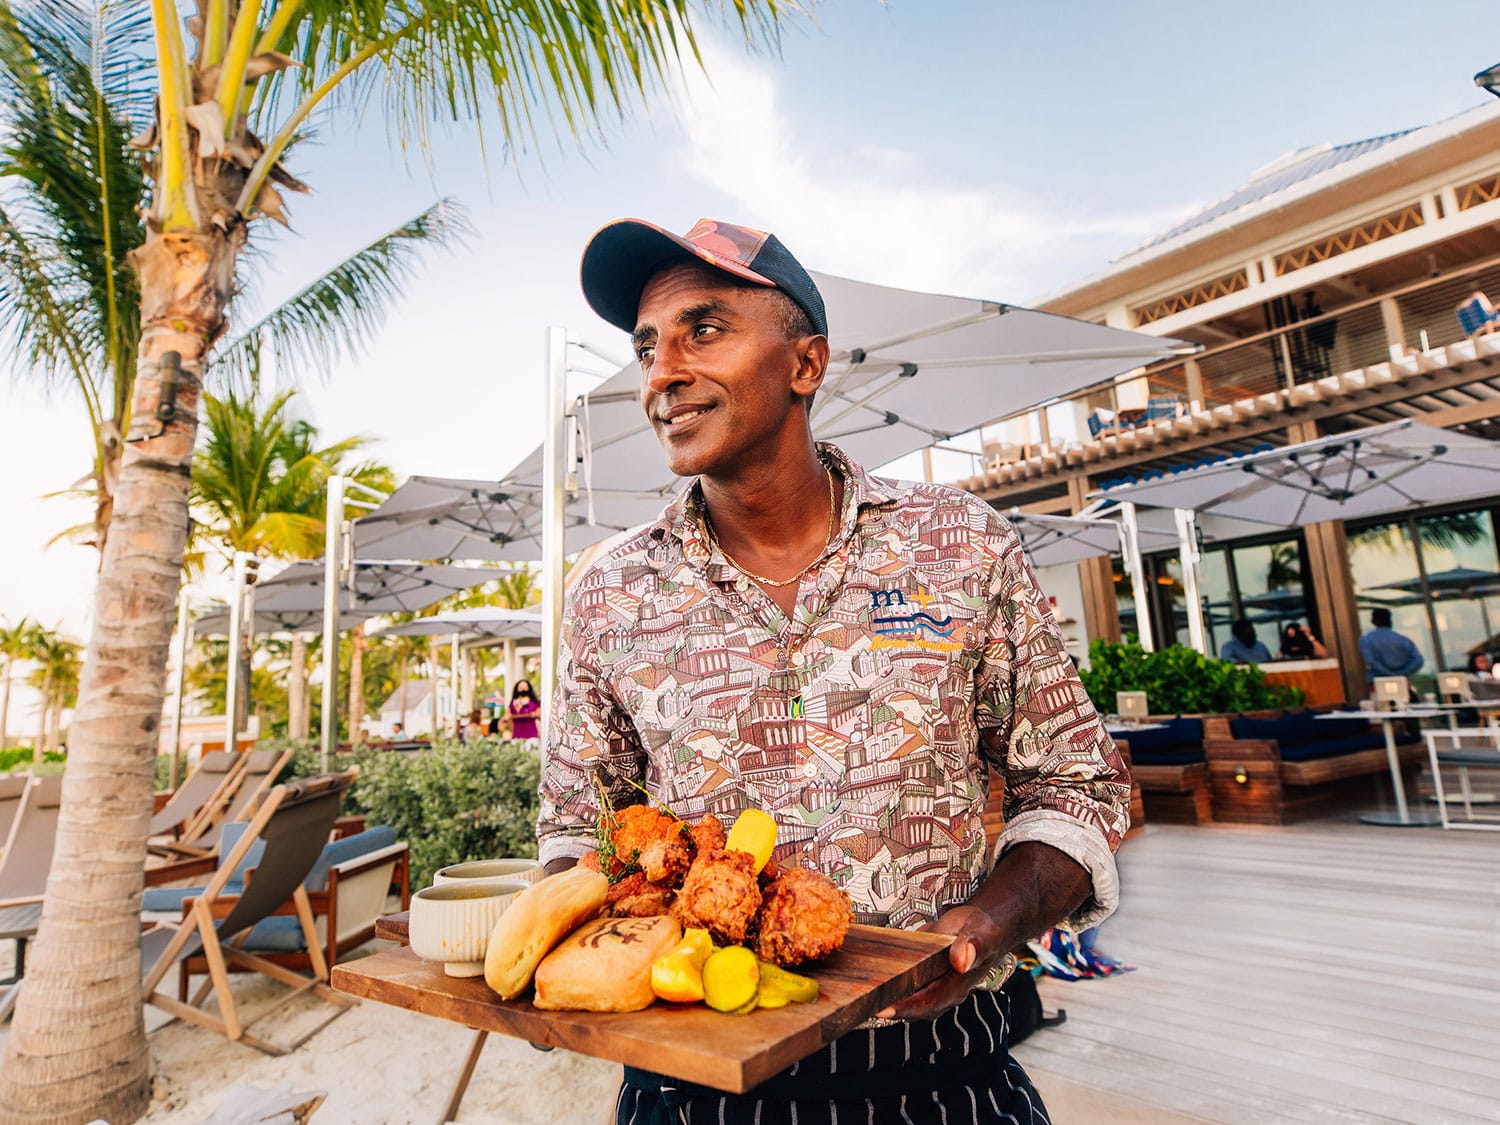 Celebrity Chef Marcus Samuelsson showcasing the signature fried chicken from his restaurant, Marcus at Baha Mar Fish + Chop House.